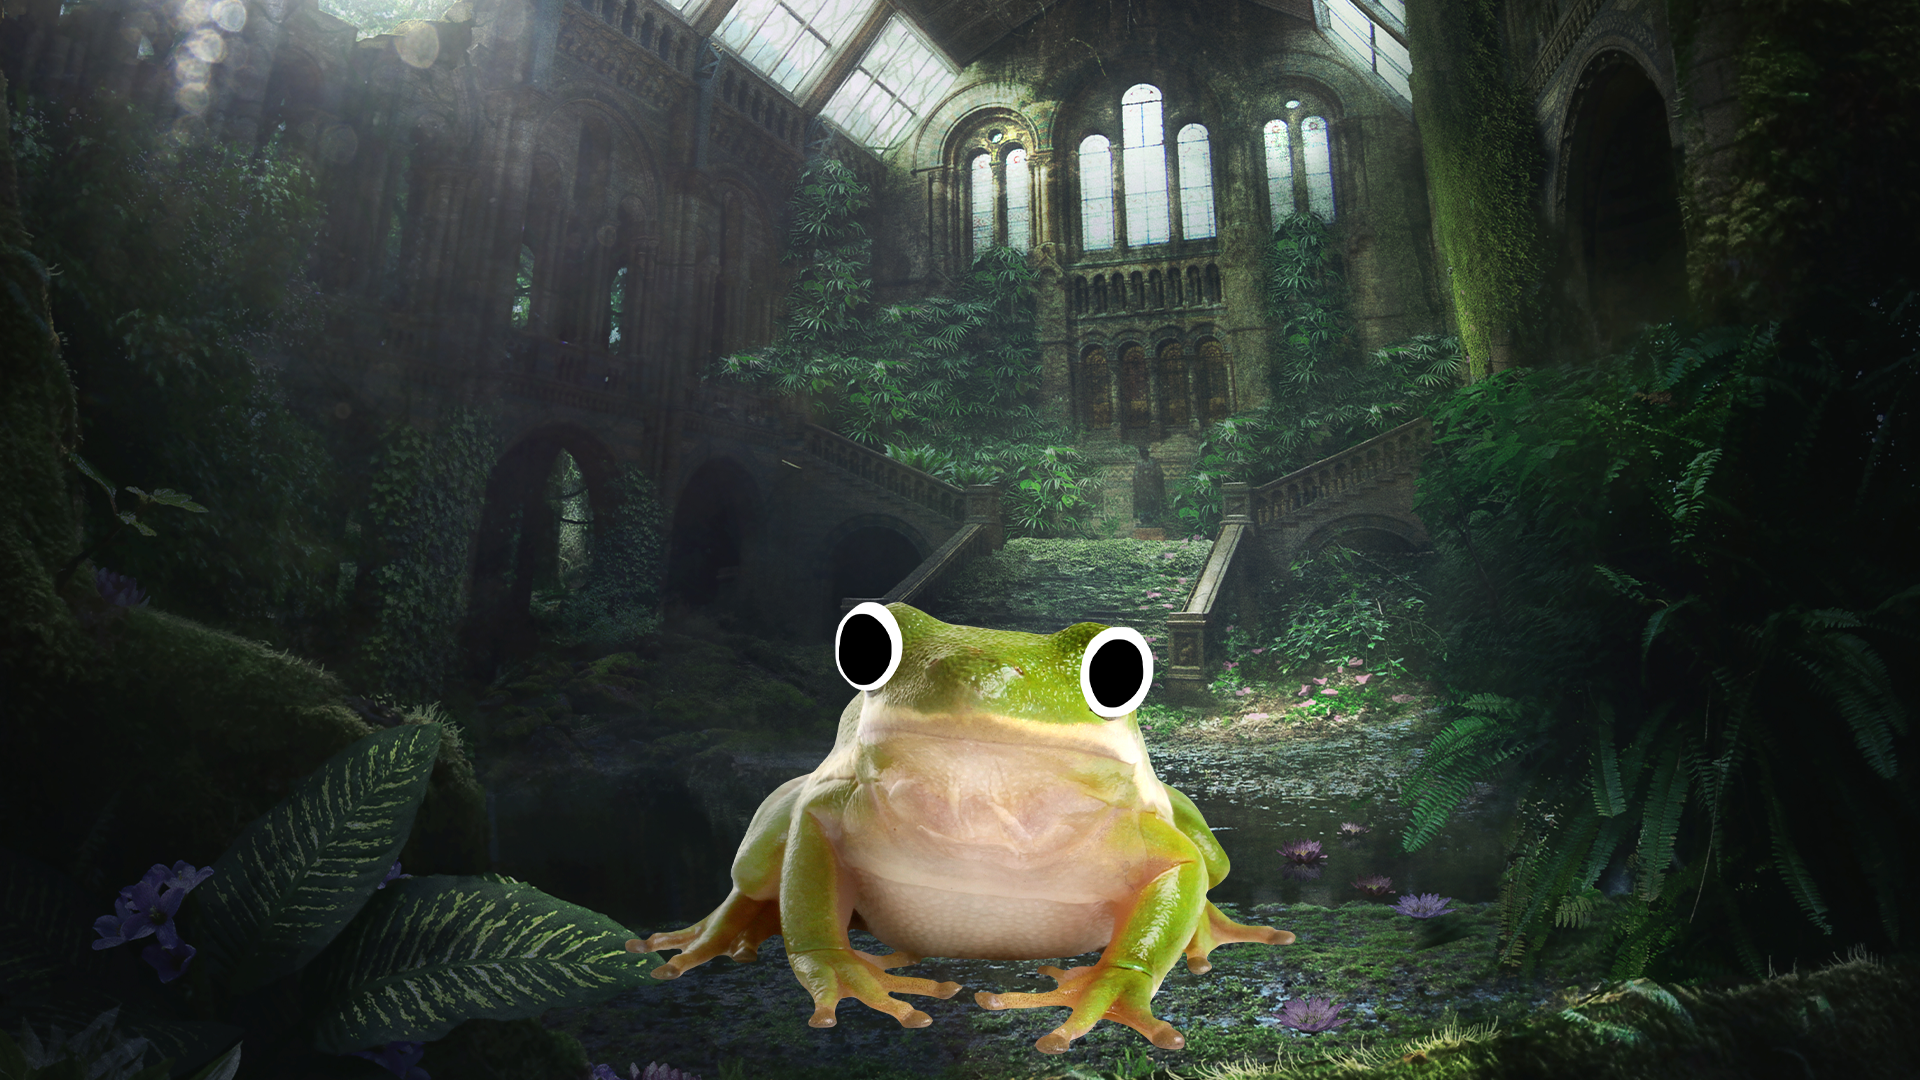 Frog sitting in abandoned building